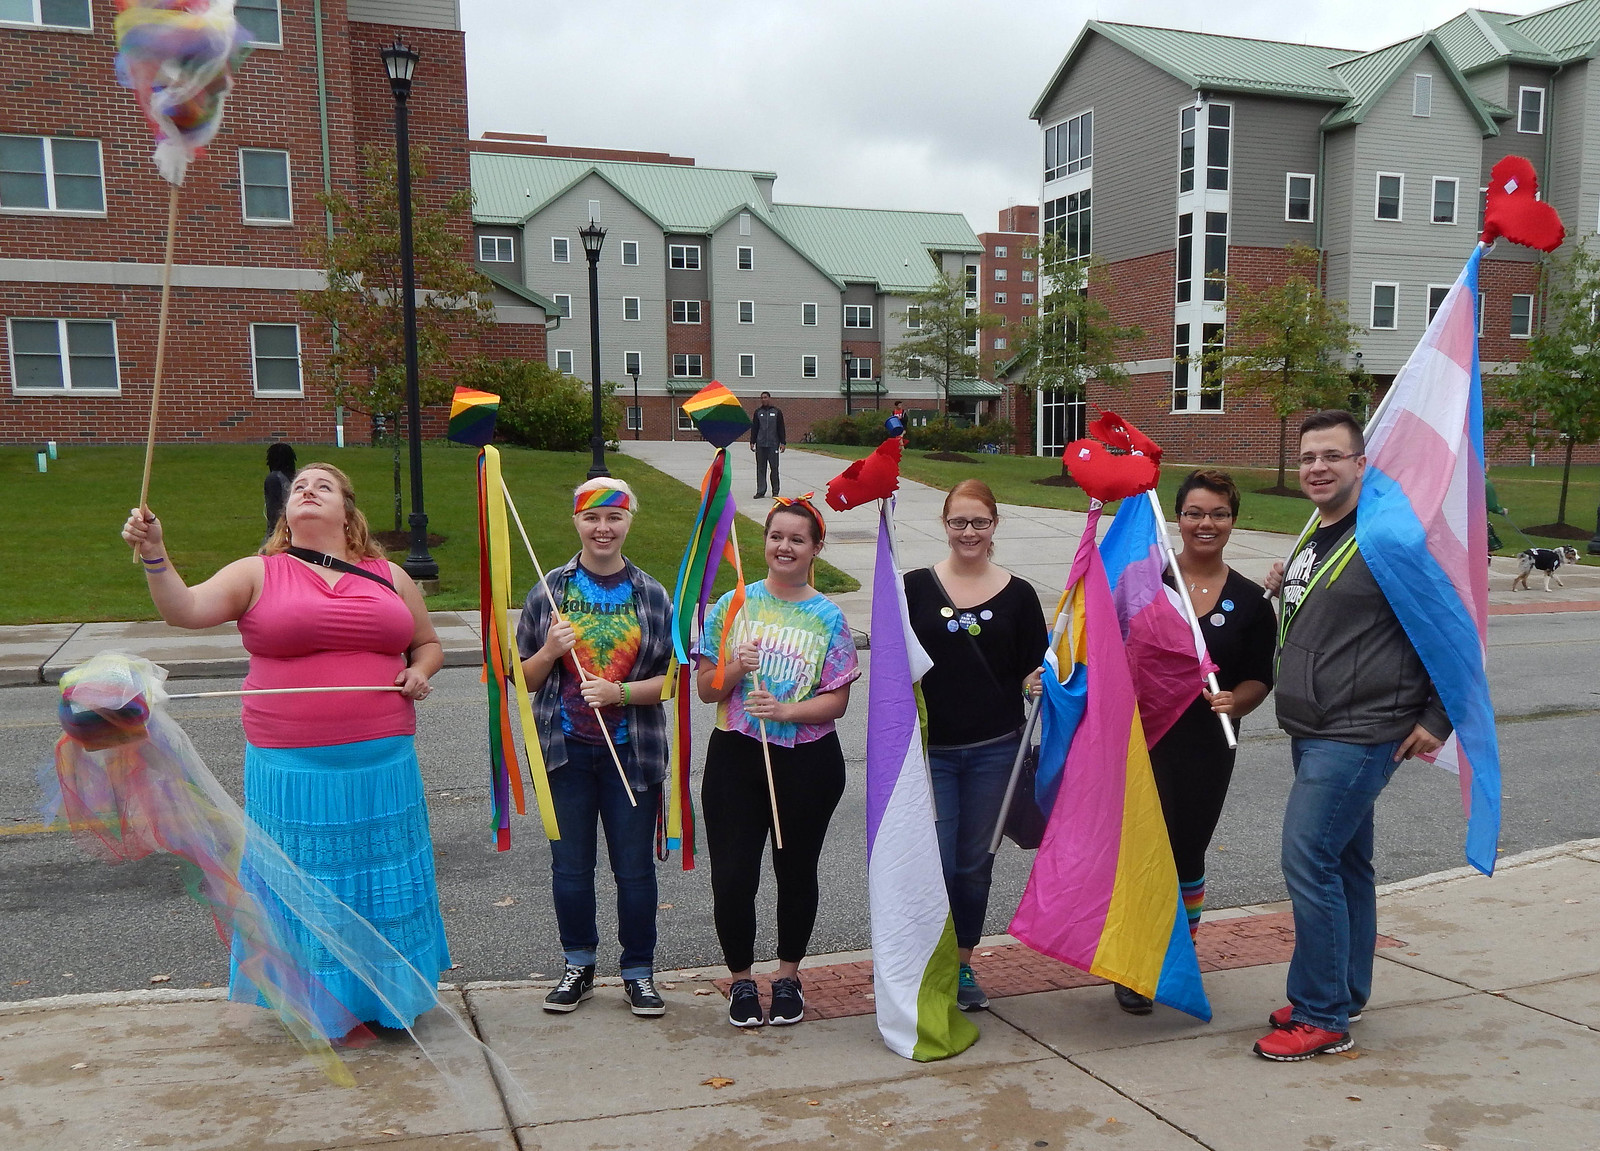 On Saturday, October 8, members of NW PA Pride Alliance and Identity, Edinboro University's LGBTQIA student group, marched in the Edinboro Homecoming Parade. The theme this year as Level Up - Classic Video Games. Season Crannell made themed decorations fo